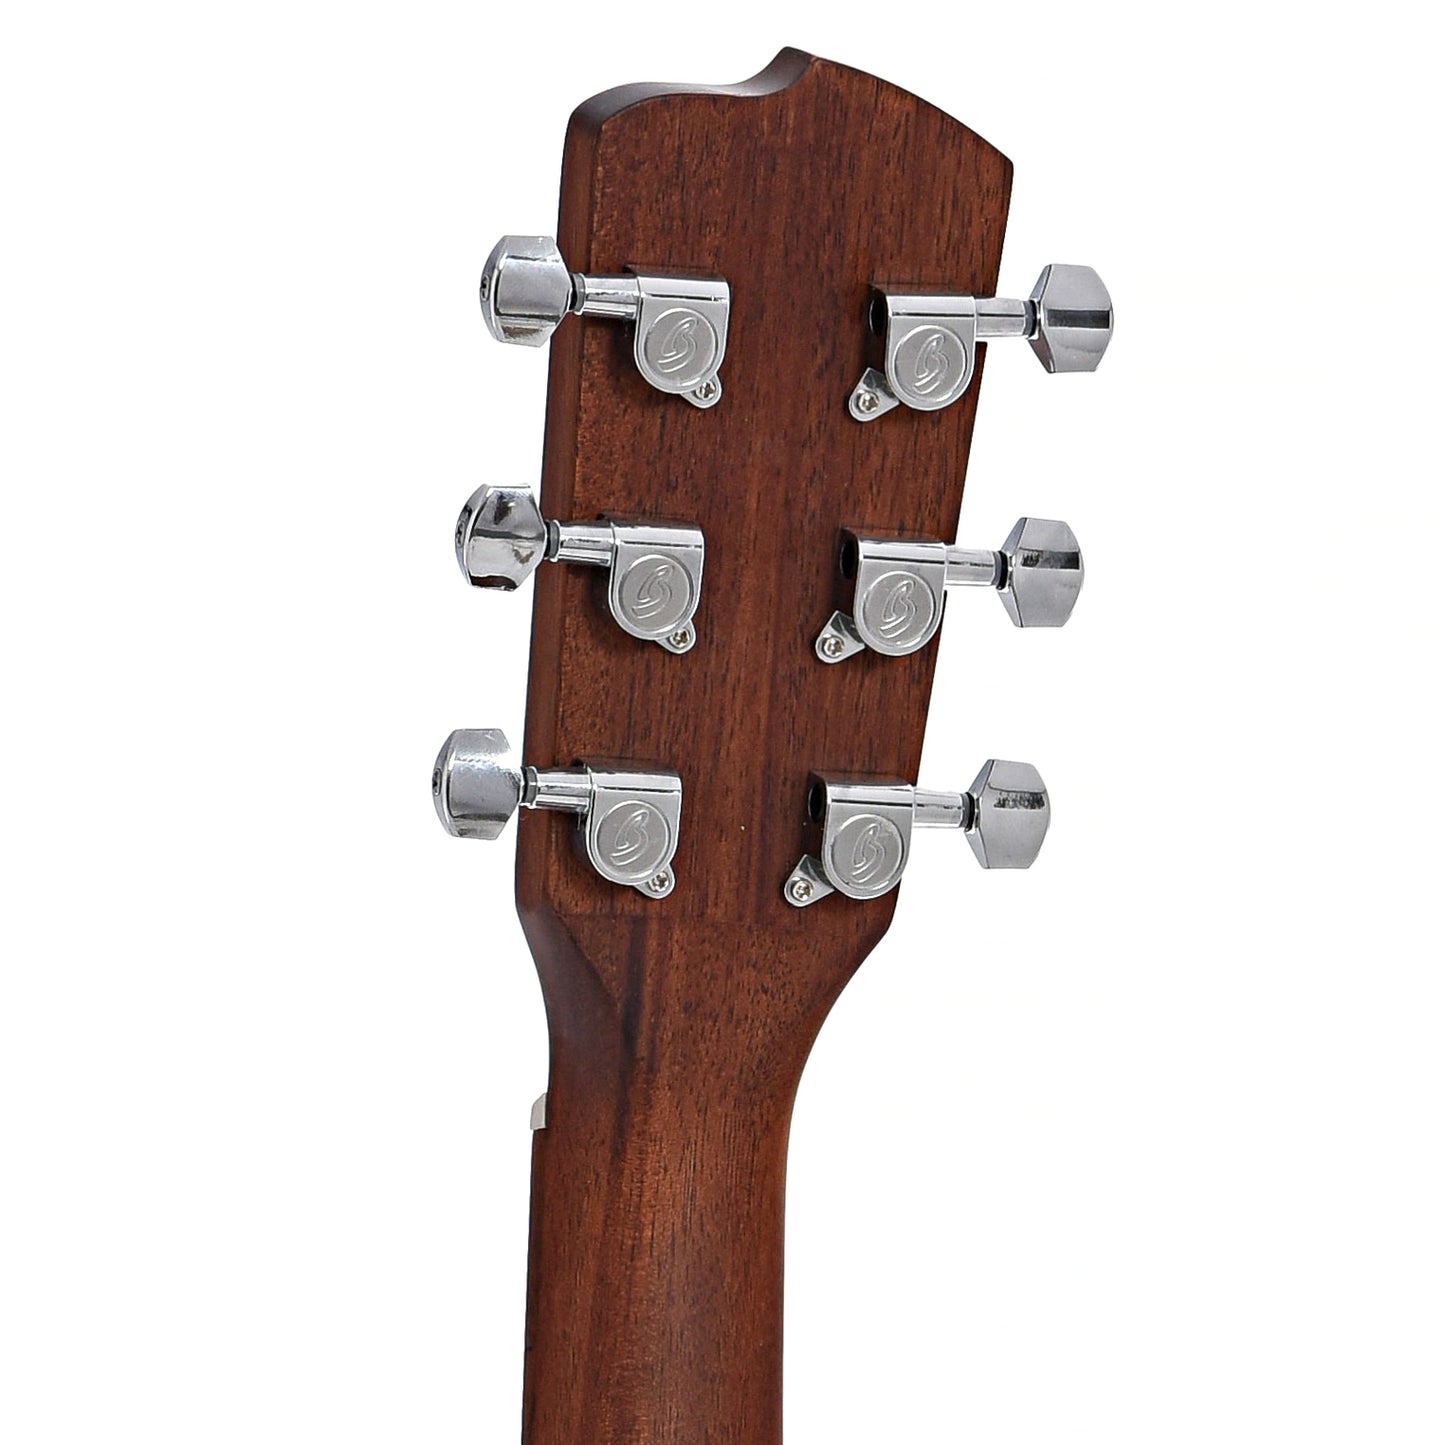 Breedlove Eco Collection Discovery S Concerto Edgeburst CE European Spruce-African Mahogany Acoustic-Electric Guitar